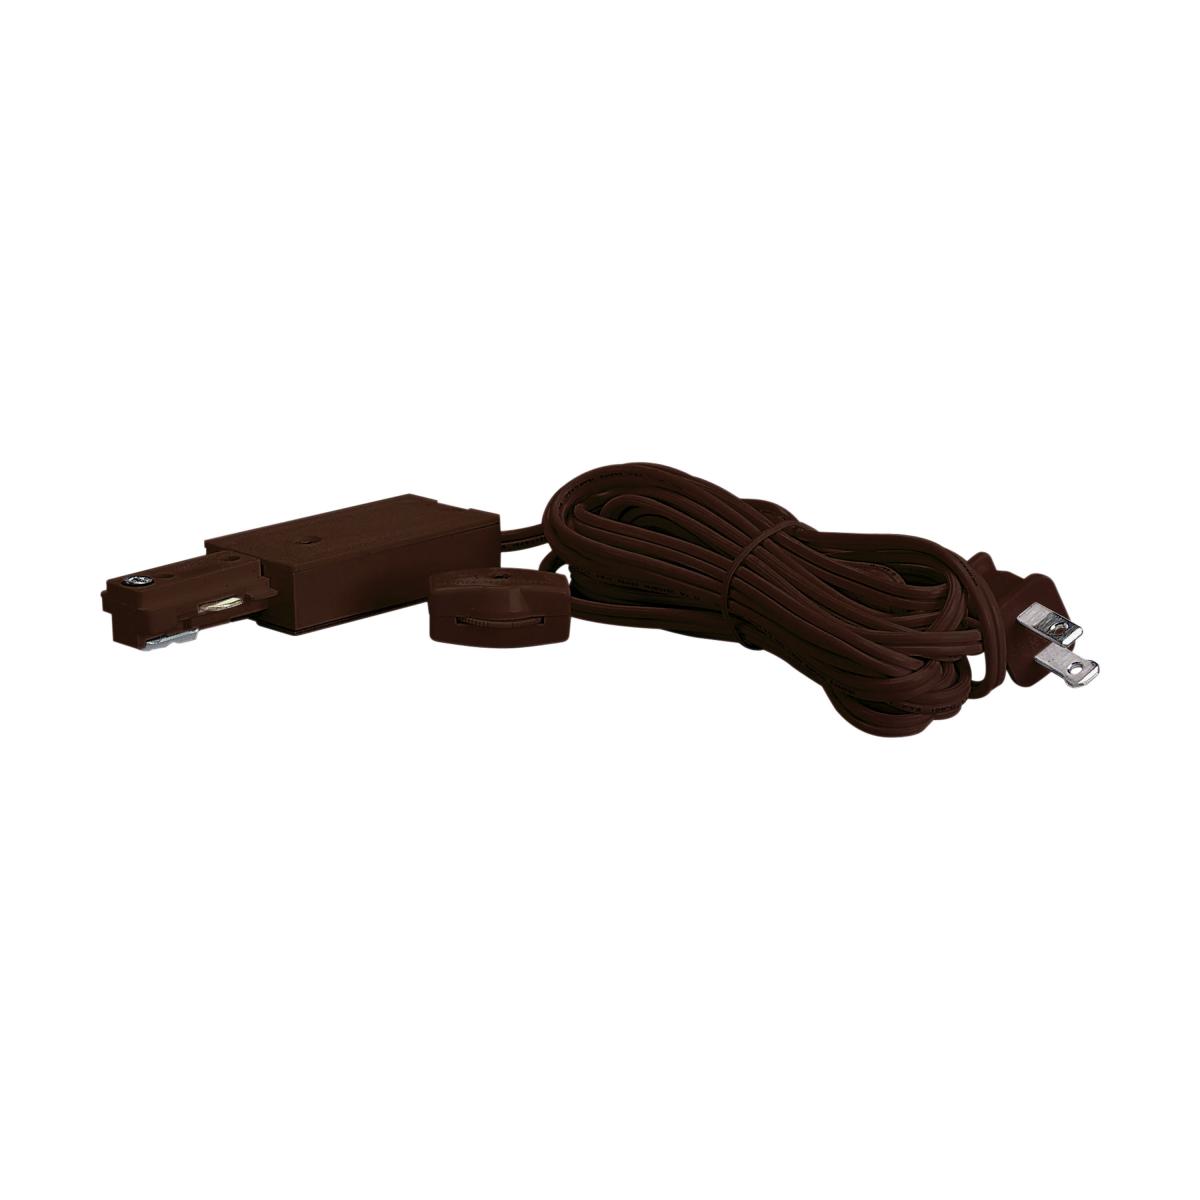 TP201 LIVE END CORD KIT BROWN